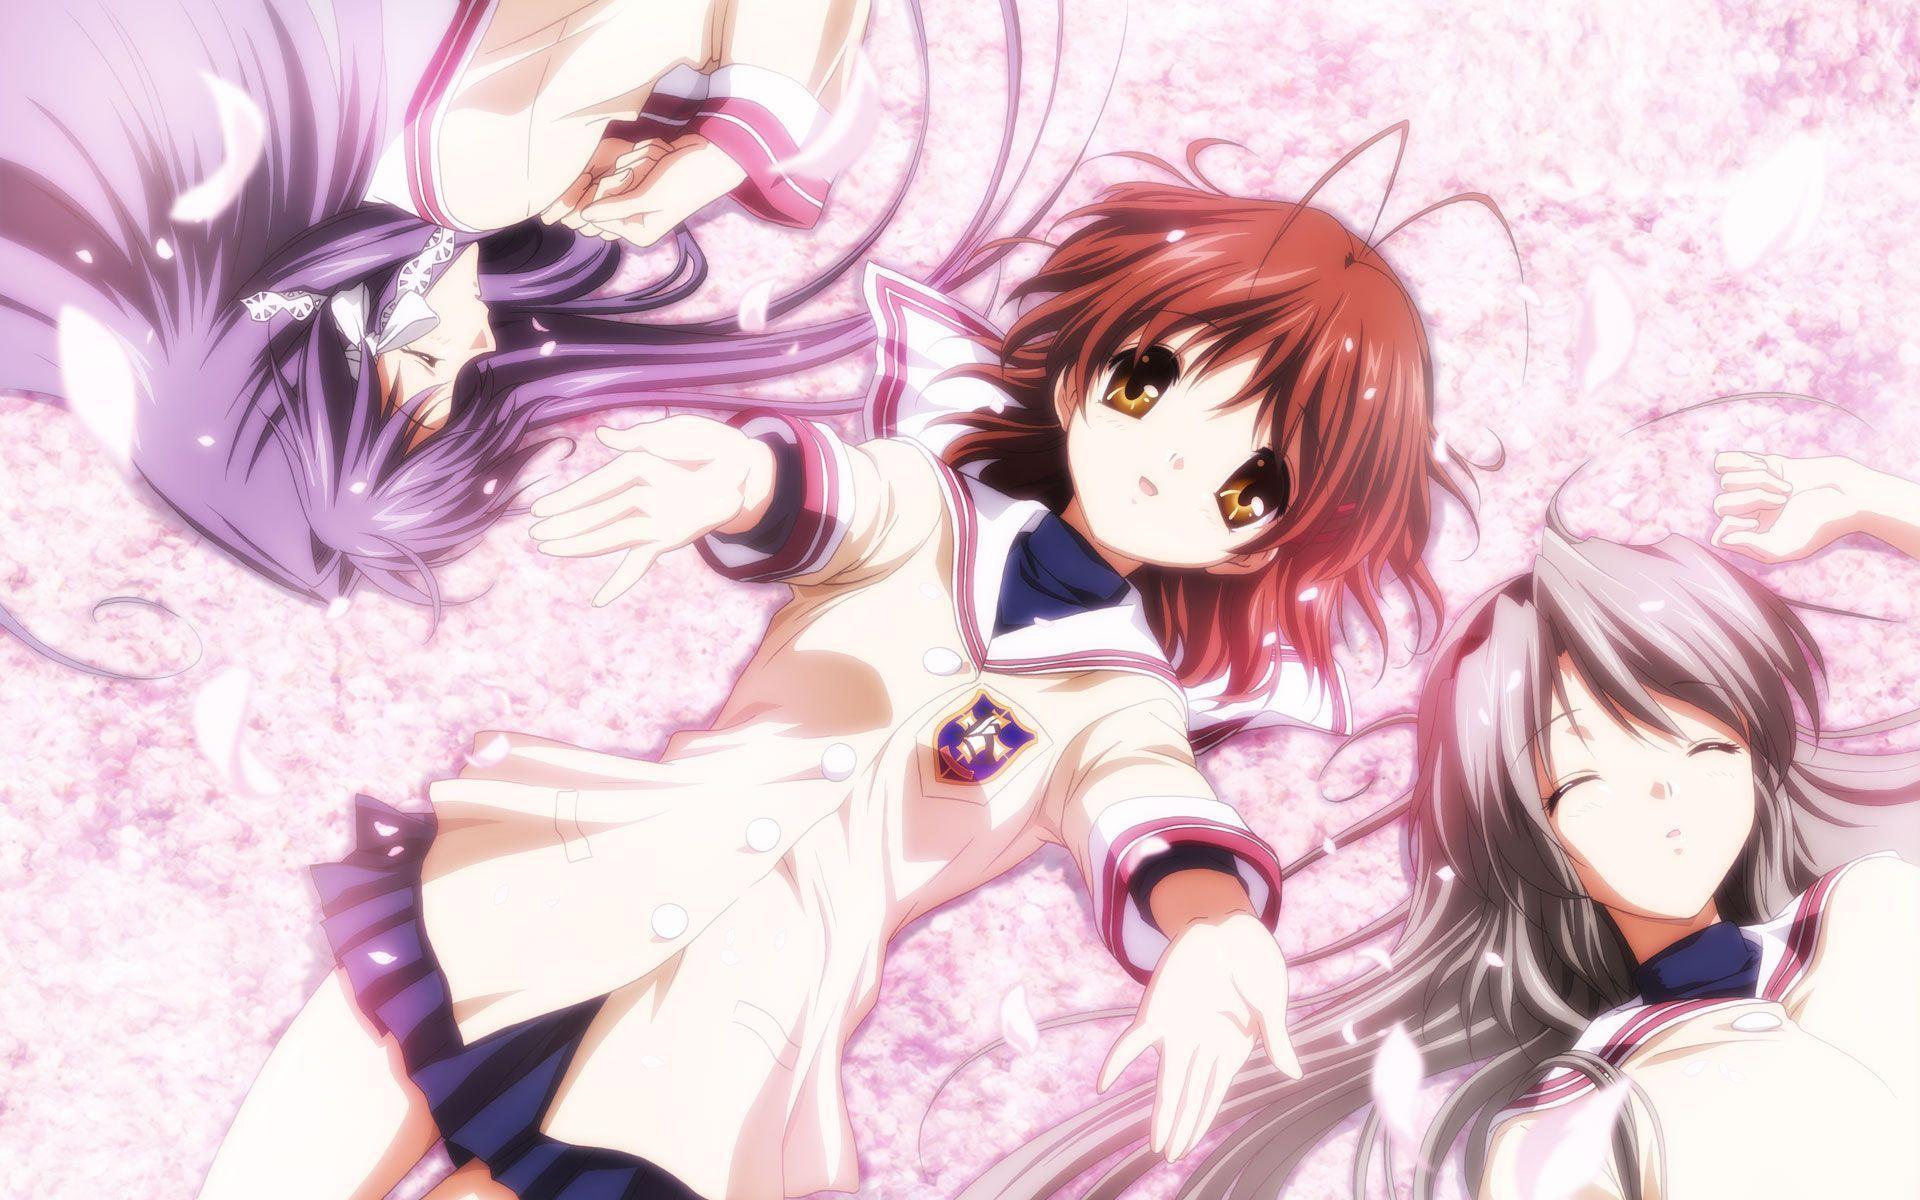 clannad and clannad after story Wallpaper 30798156